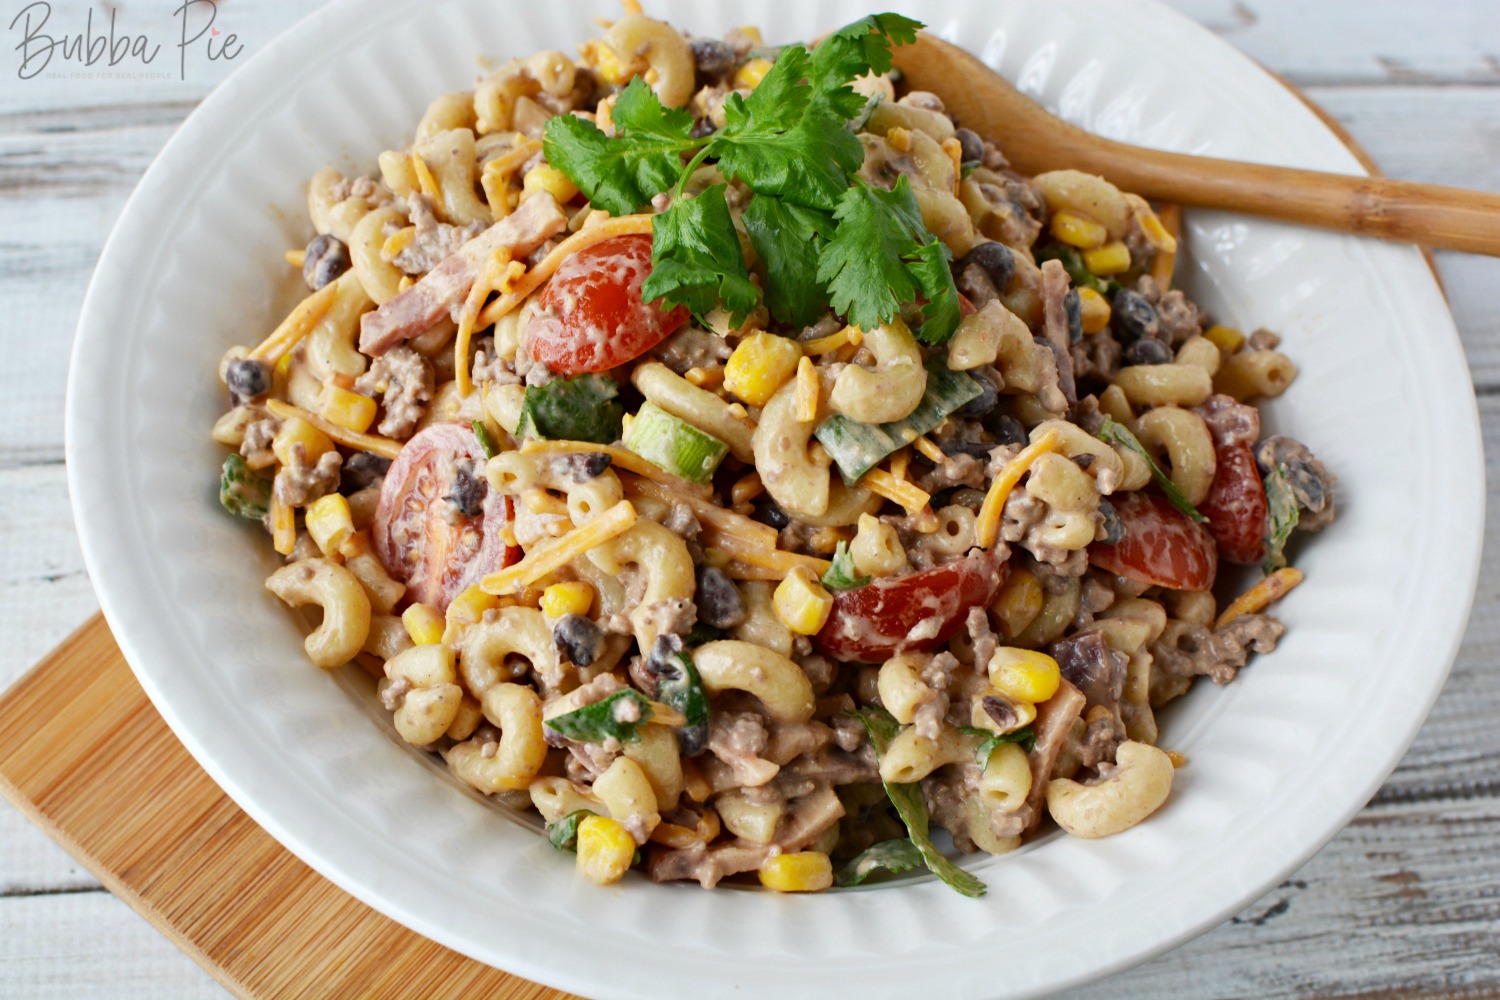 cowboy pasta salad is a great side dish for picnics or parties